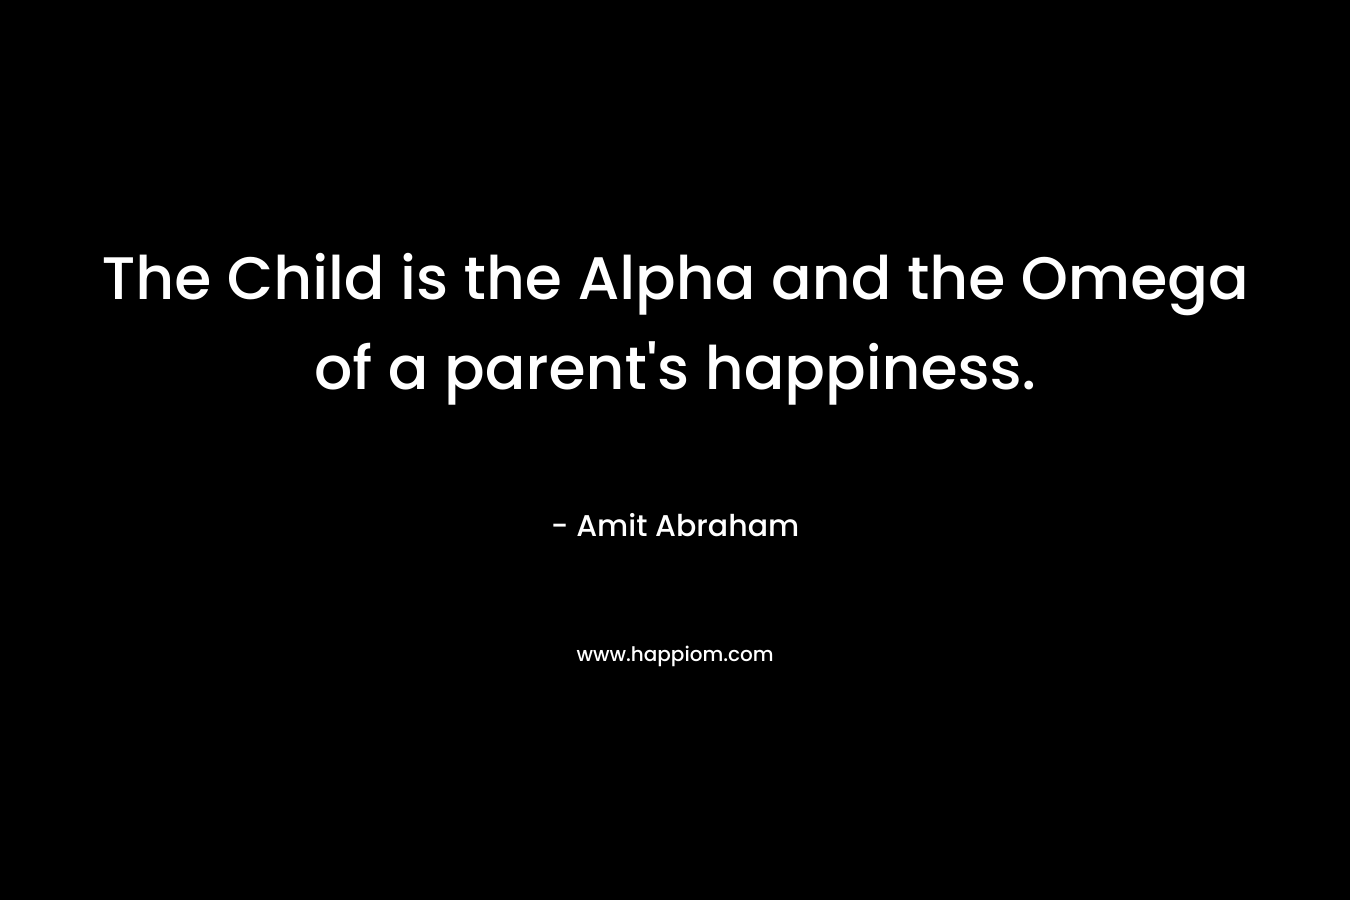 The Child is the Alpha and the Omega of a parent’s happiness. – Amit Abraham